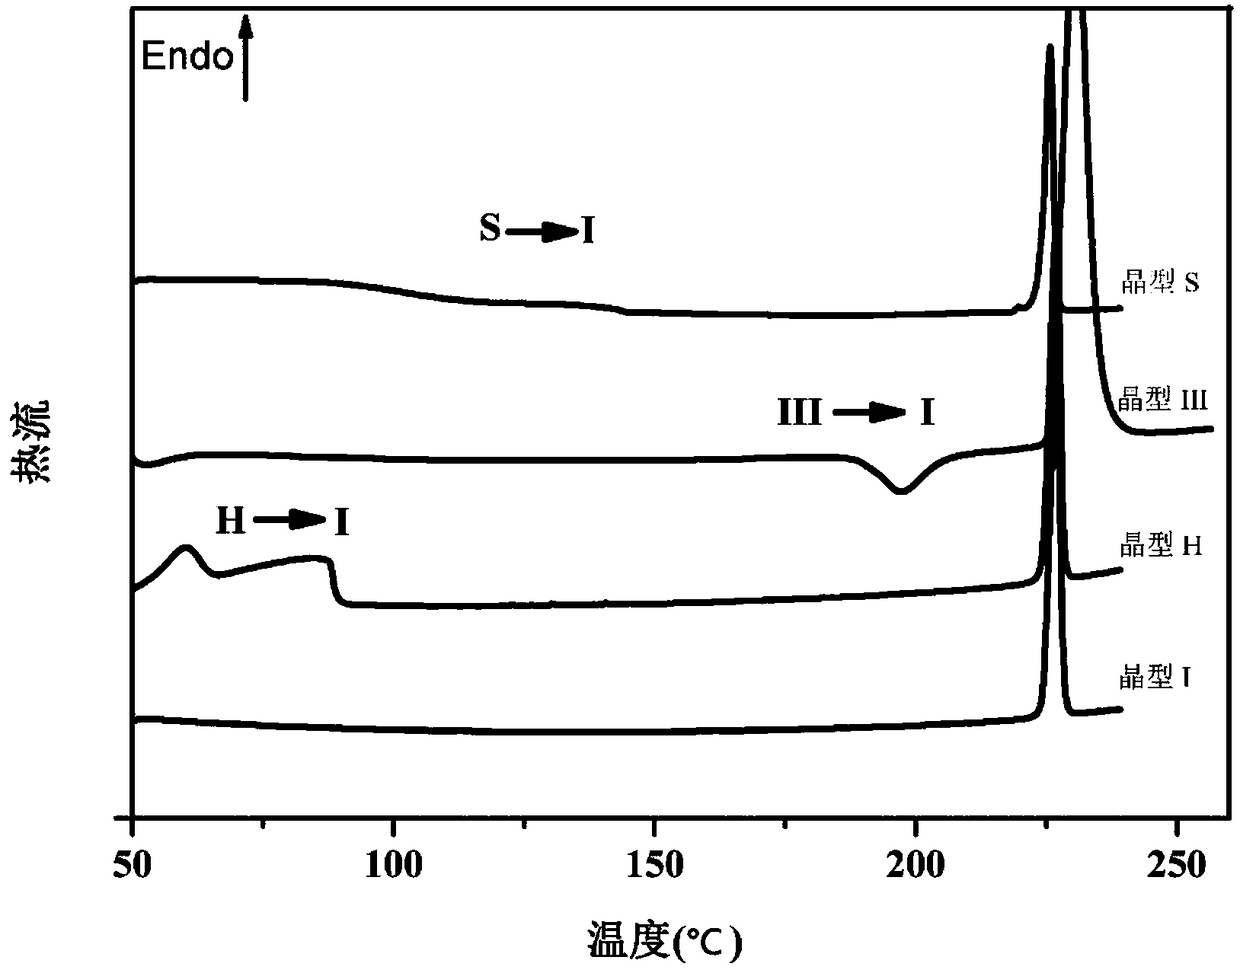 Crystallization process and application of preparing inositol with high crystallinity and large particle size